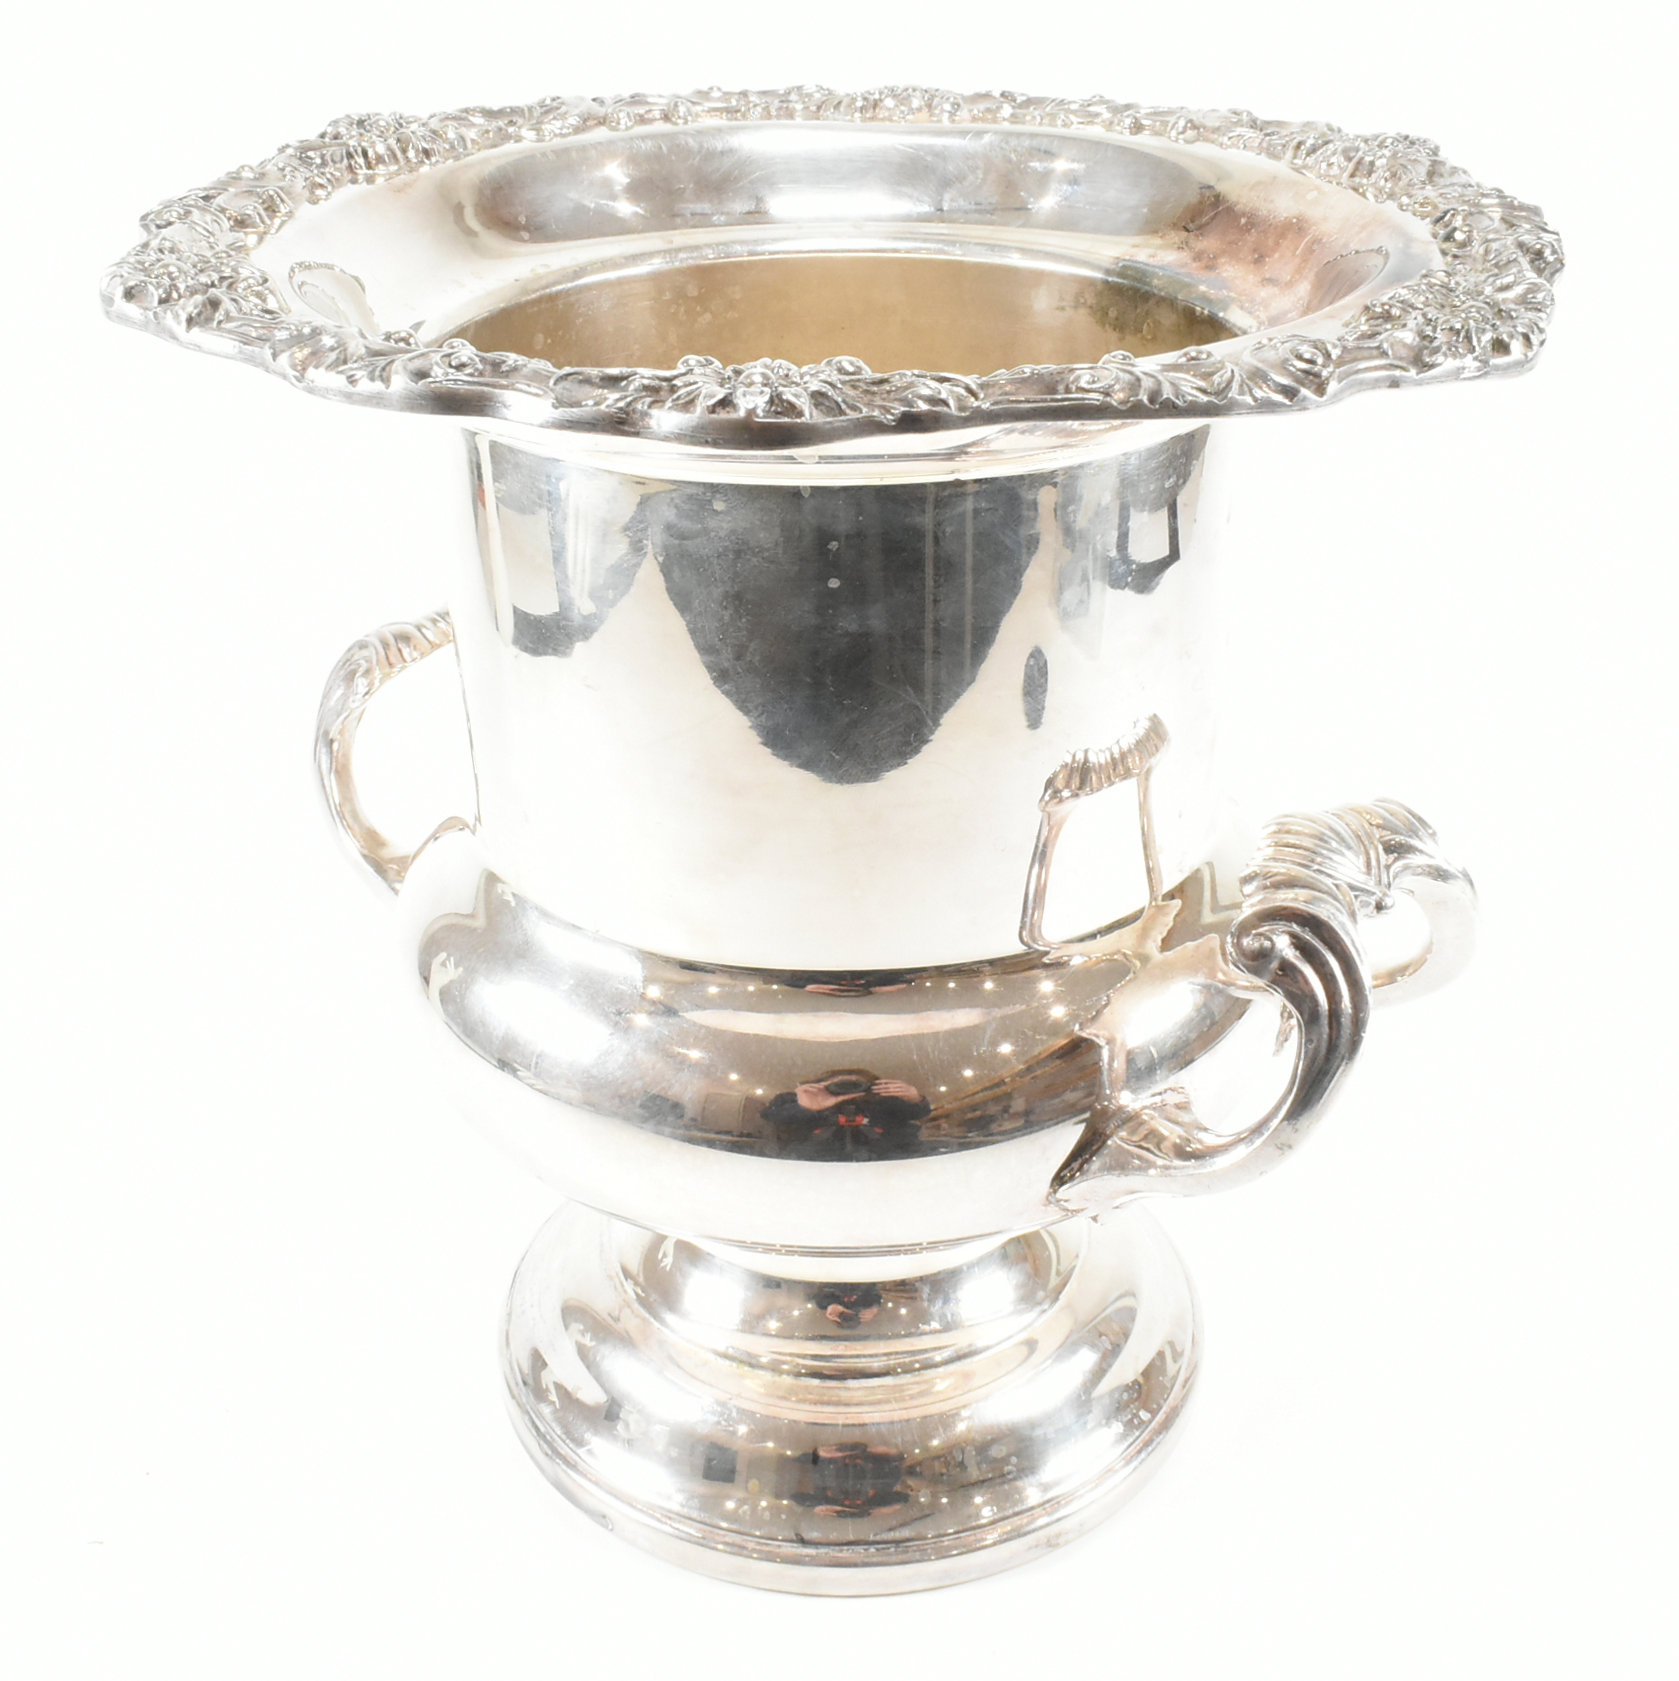 SILVER PLATED VINTAGE AMERICAN CHAMPAGNE ICE BUCKET - Image 8 of 13